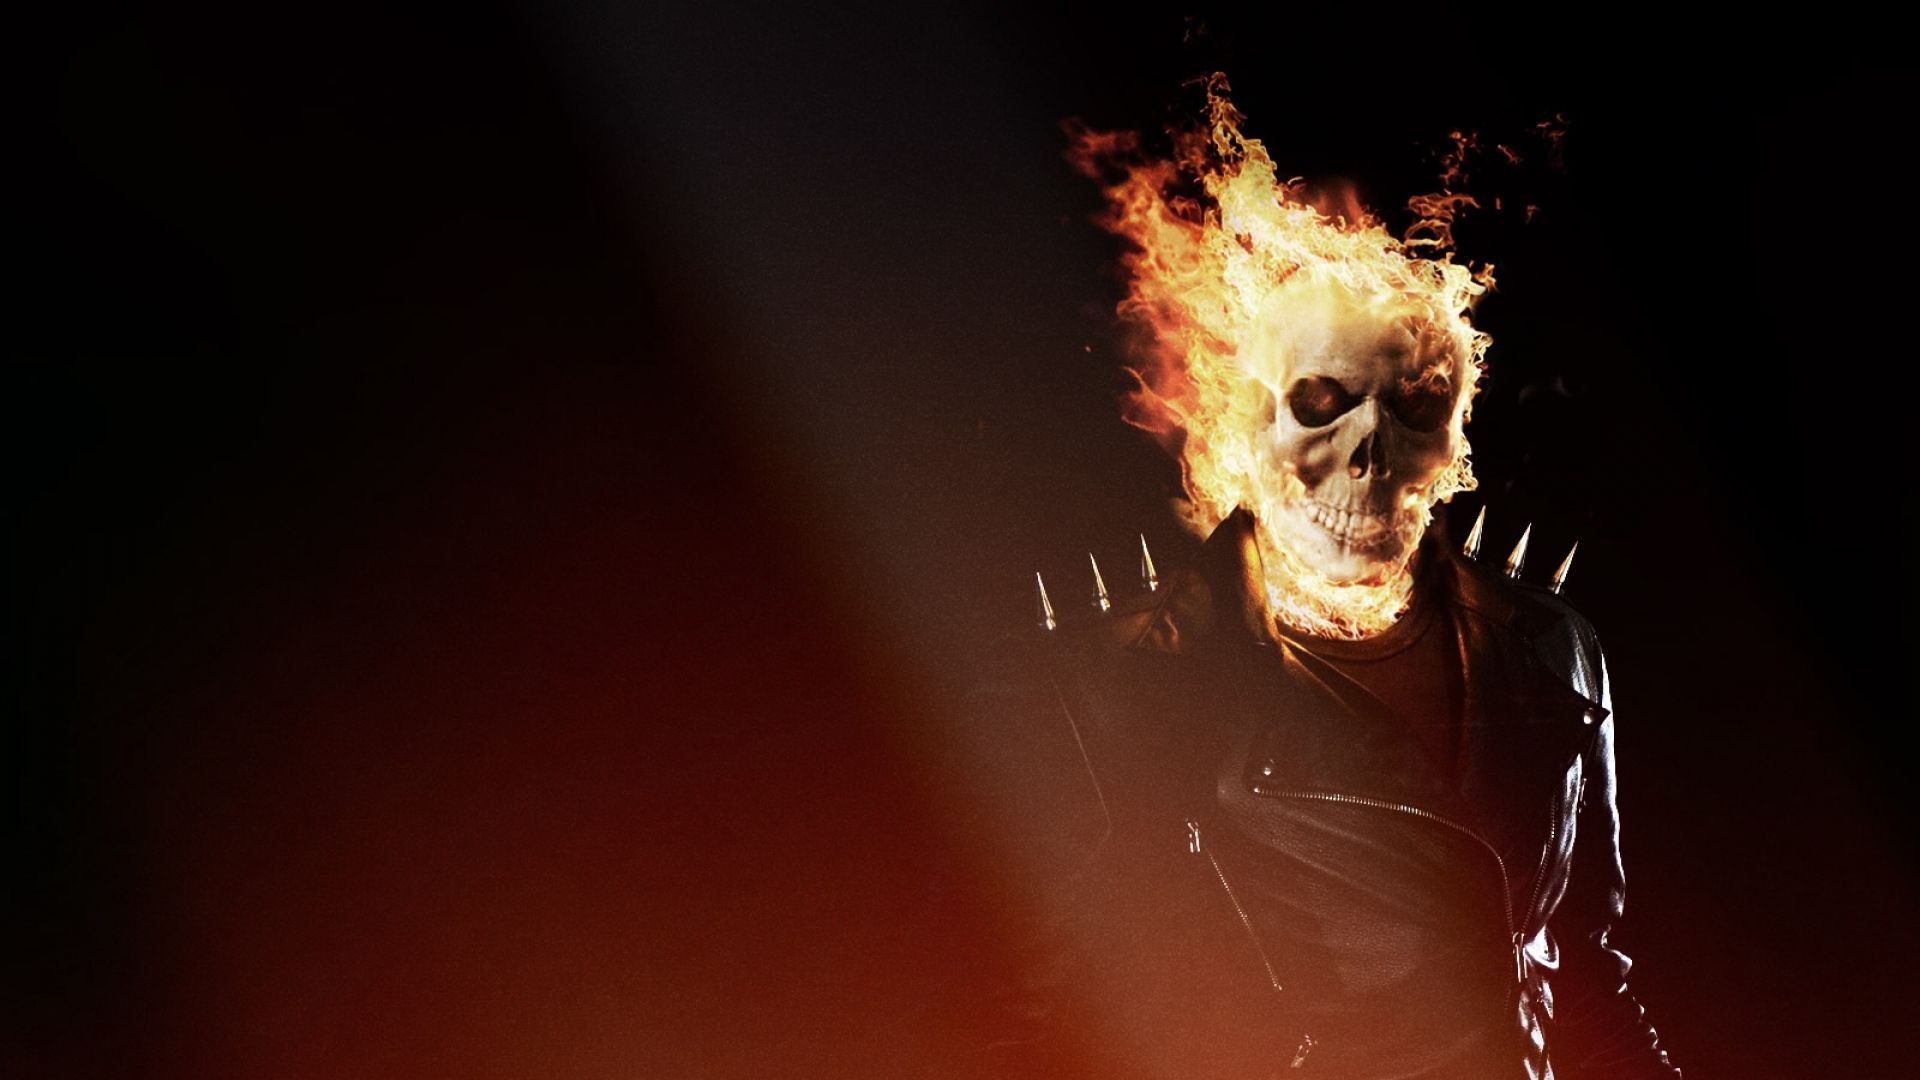 1920x1080 Download Wallpaper  Ghost rider, Skull, Fire, Flame Full .